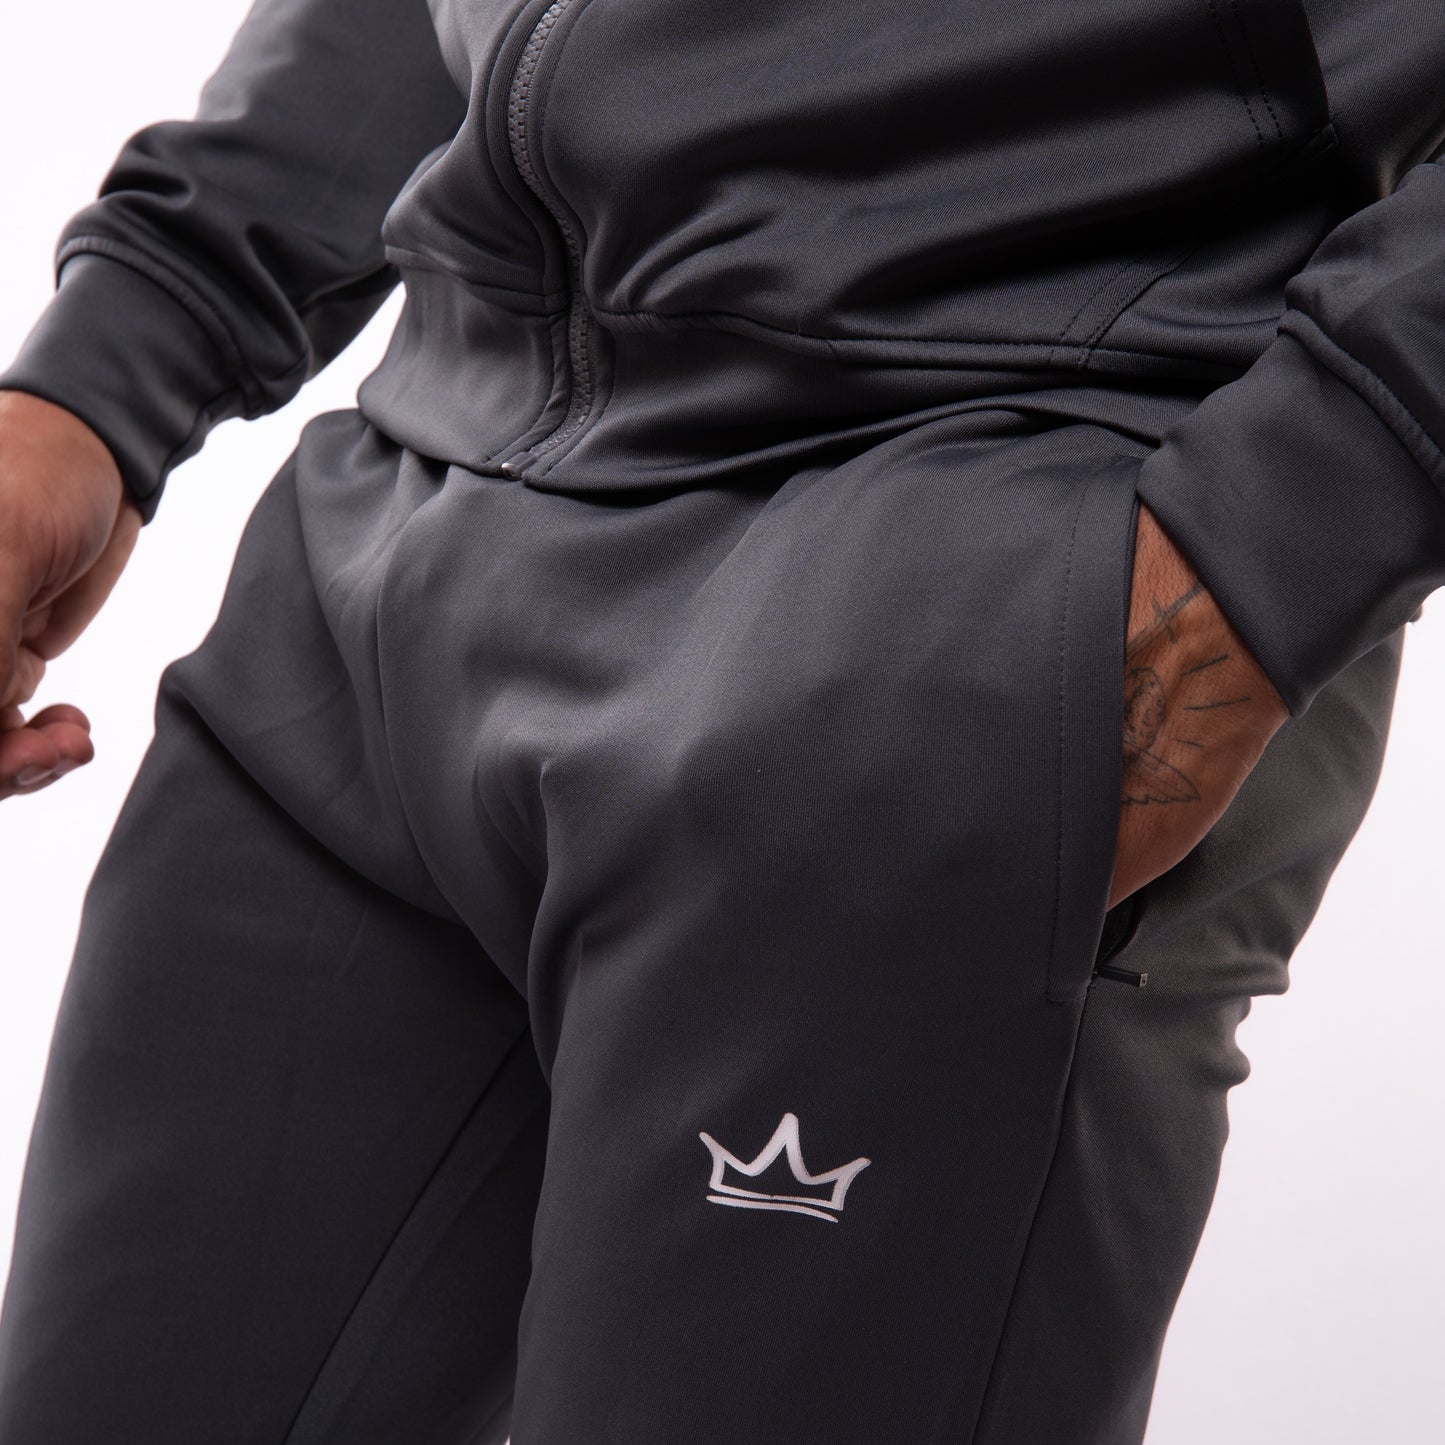 NEO CROWN JOGGER - CHARCOAL